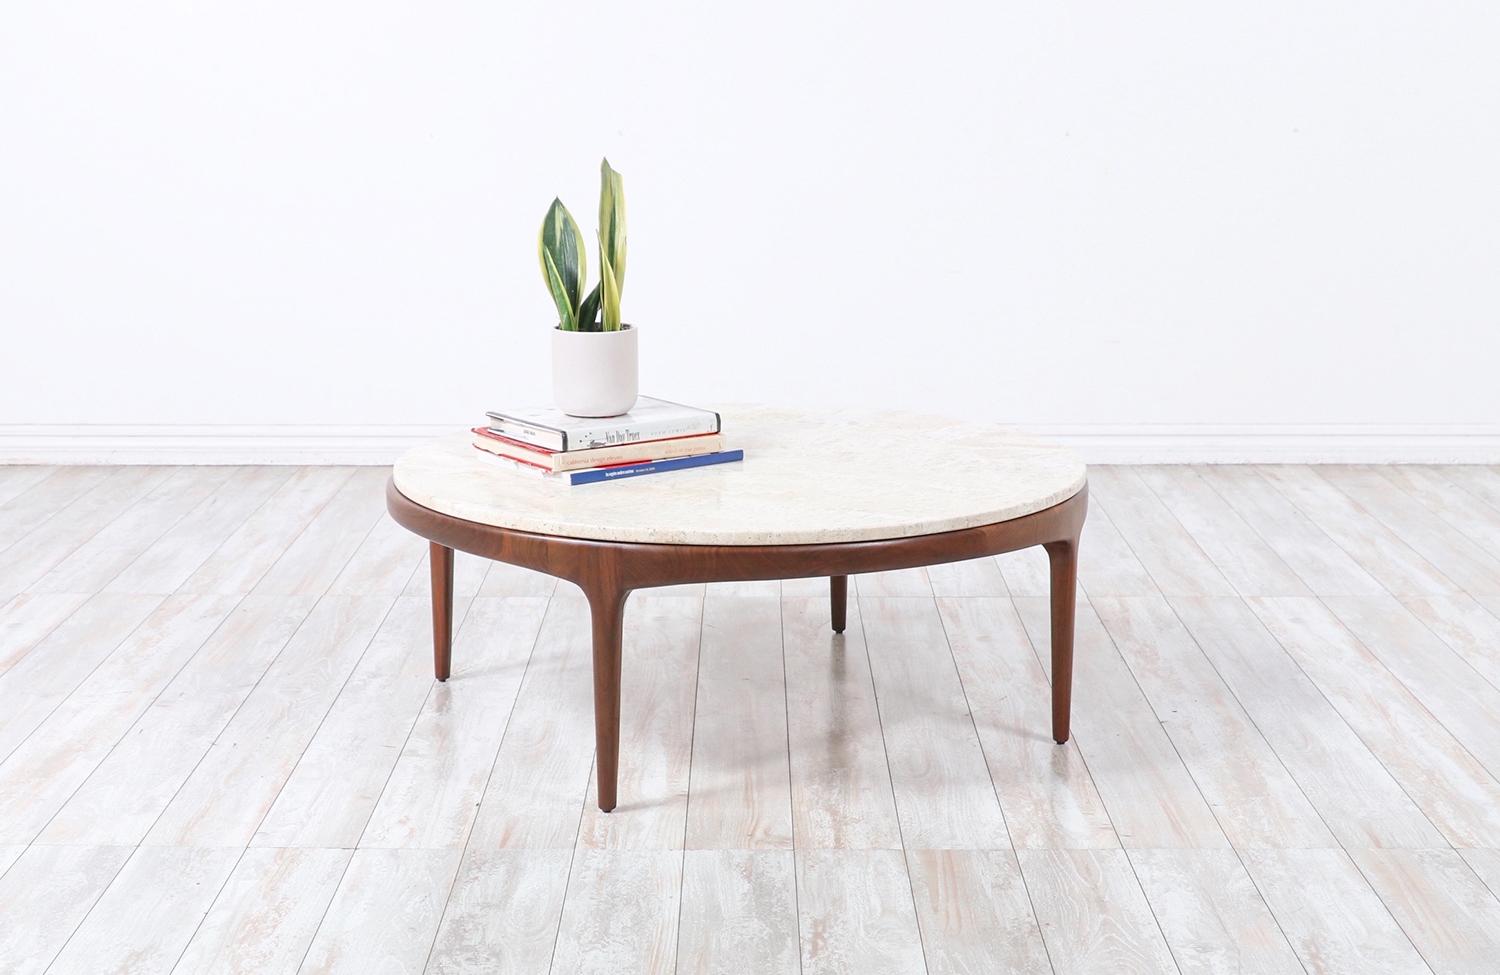 American Mid-Century Modern “Rythm” Coffee Table with Travertine Stone Top by Lane